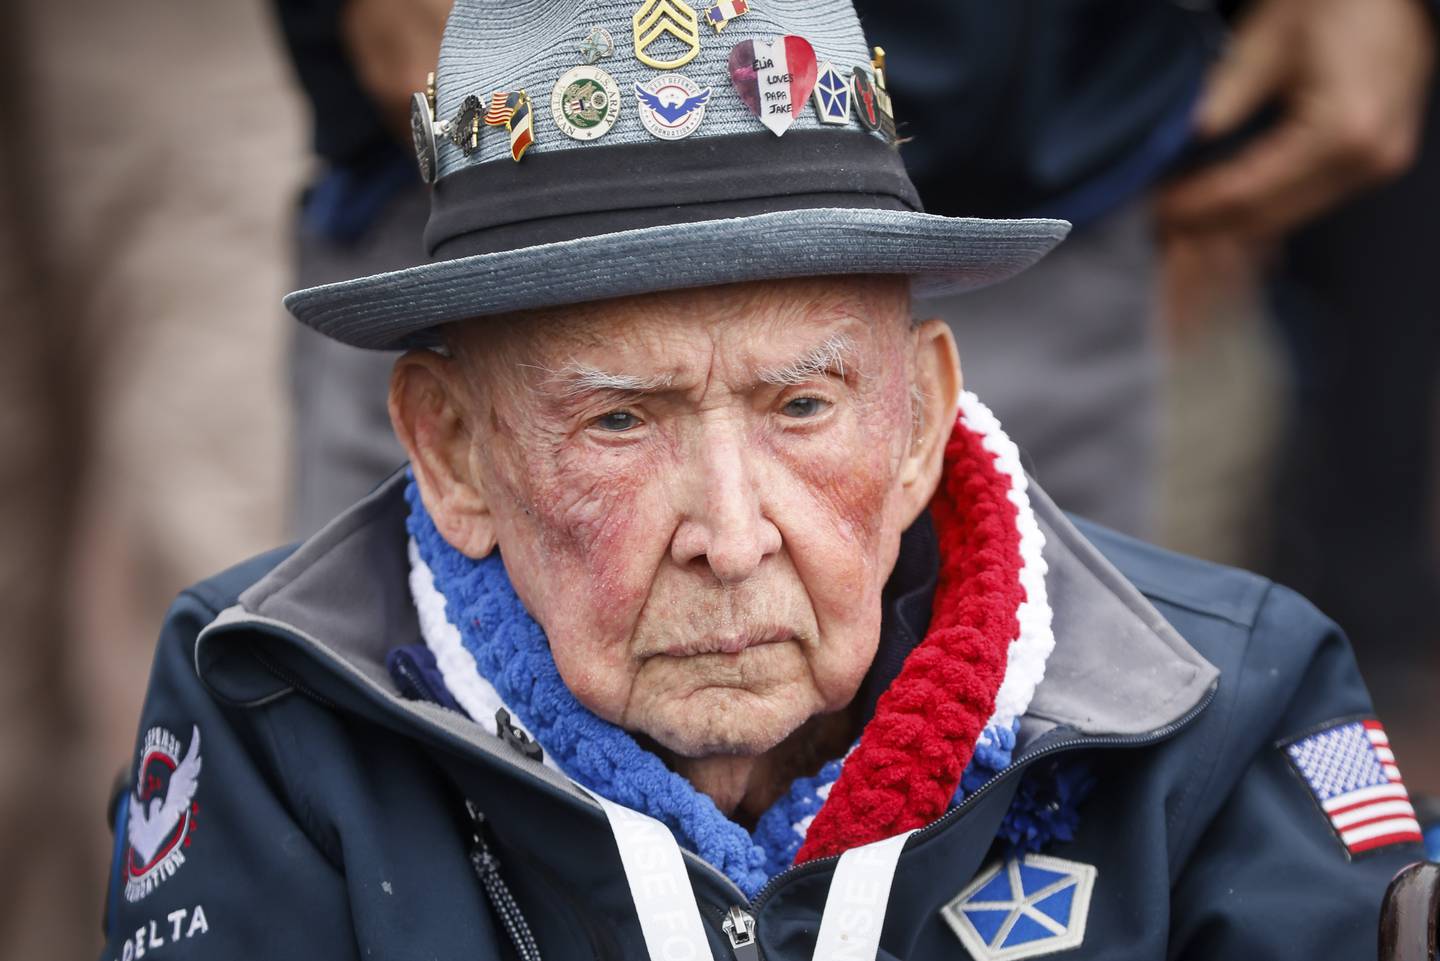 World War II veteran Jake Larson attends a ceremony to mark the 79th anniversary of the assault that led to the liberation of France and Western Europe from Nazi control, at the American Cemetery in Colleville-sur-Mer, Normandy, France, Tuesday, June 6, 2023.